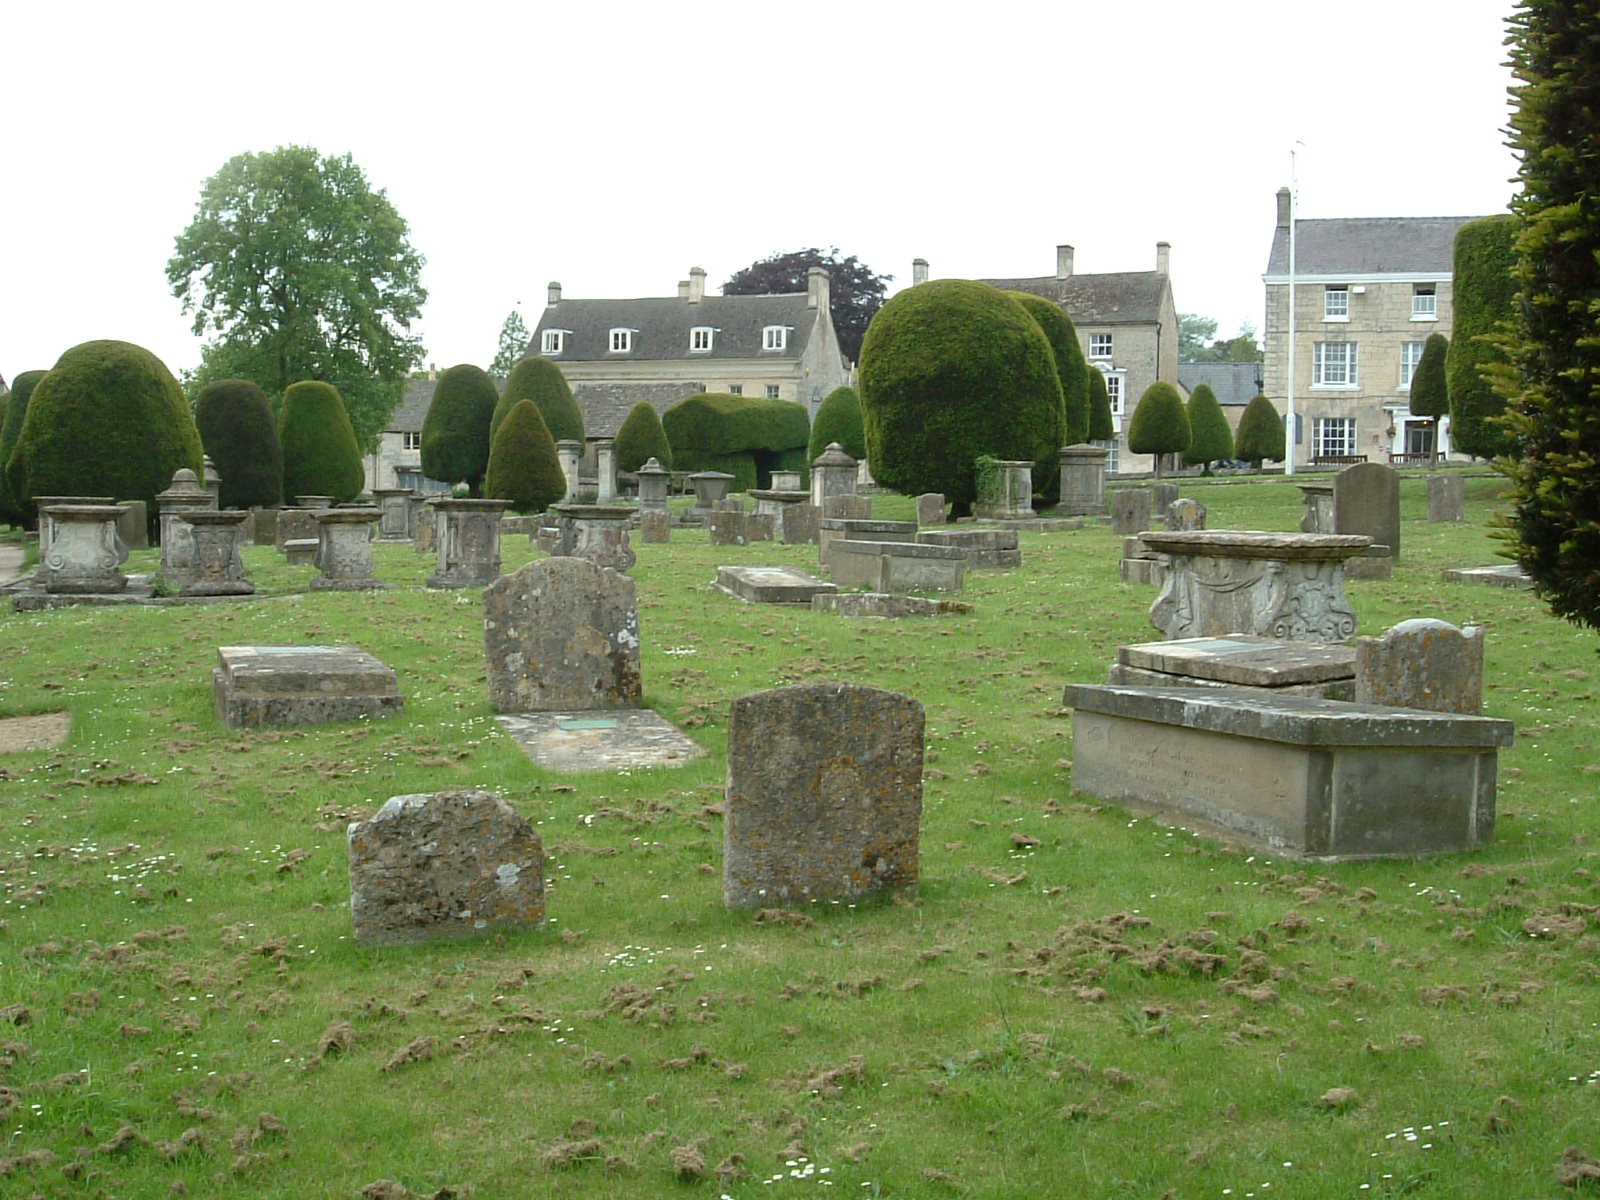 The graveyard in Painswick Church